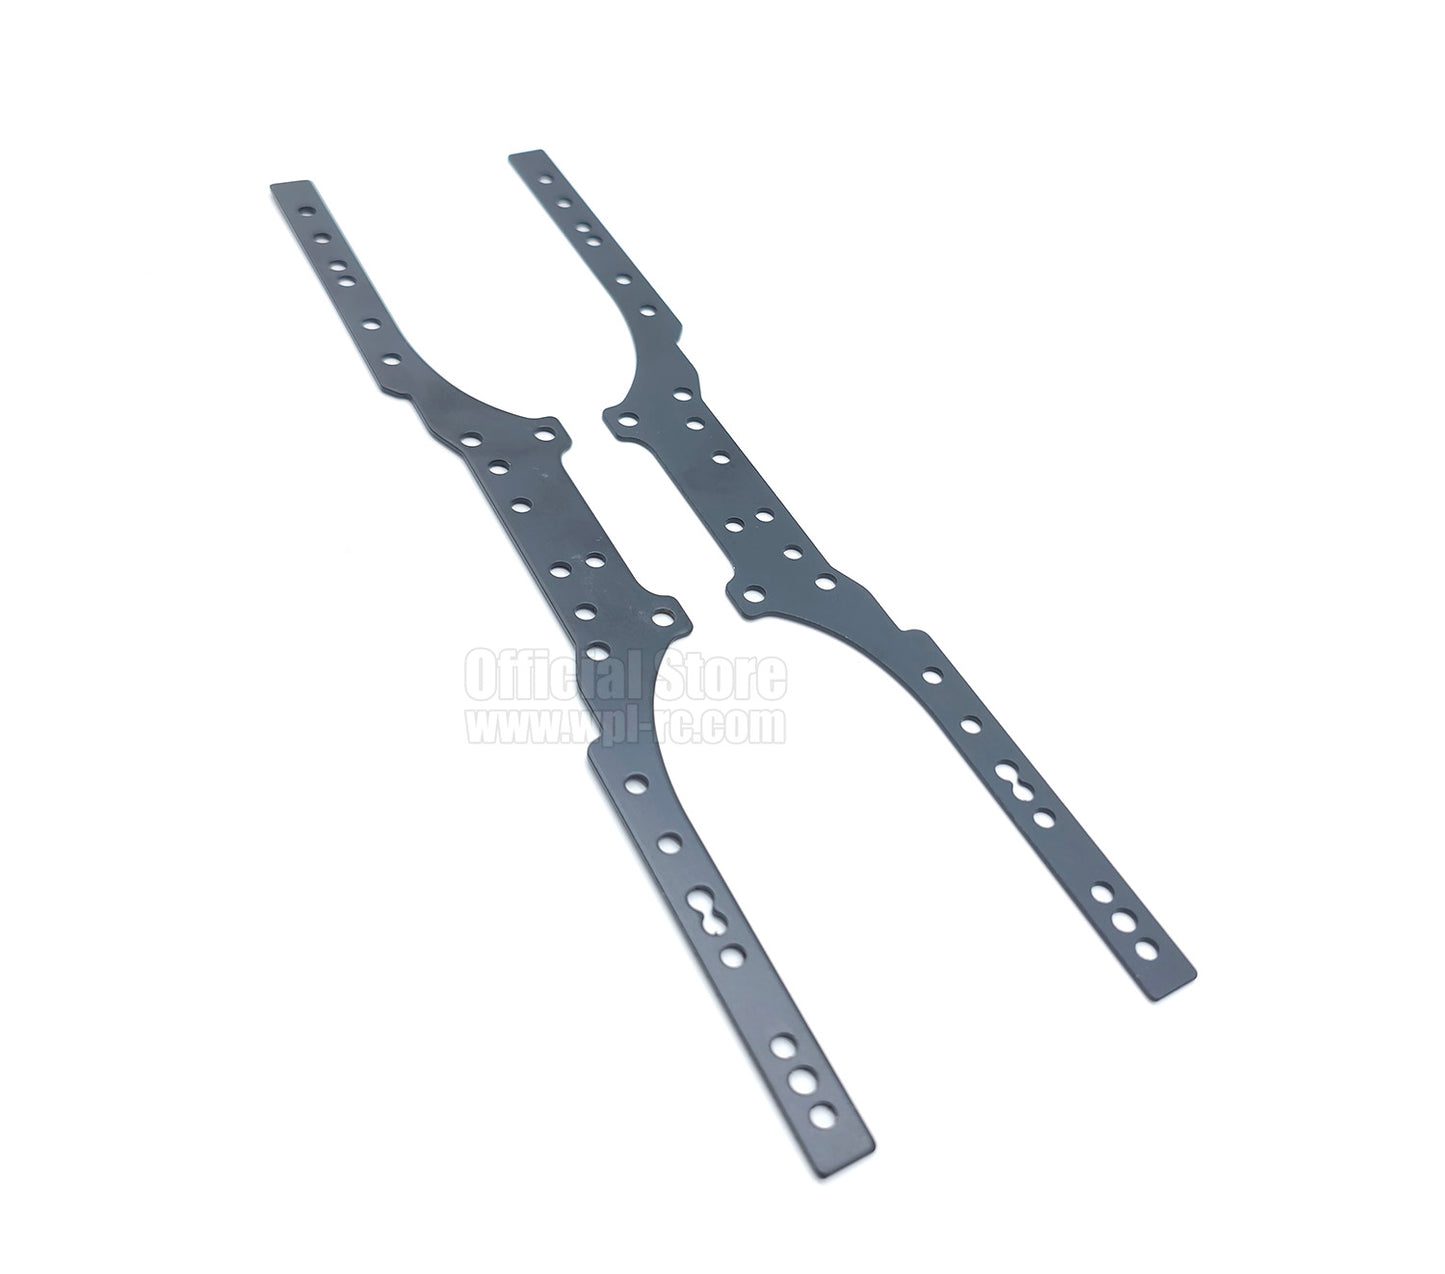 C54 Chassis Frame Rail